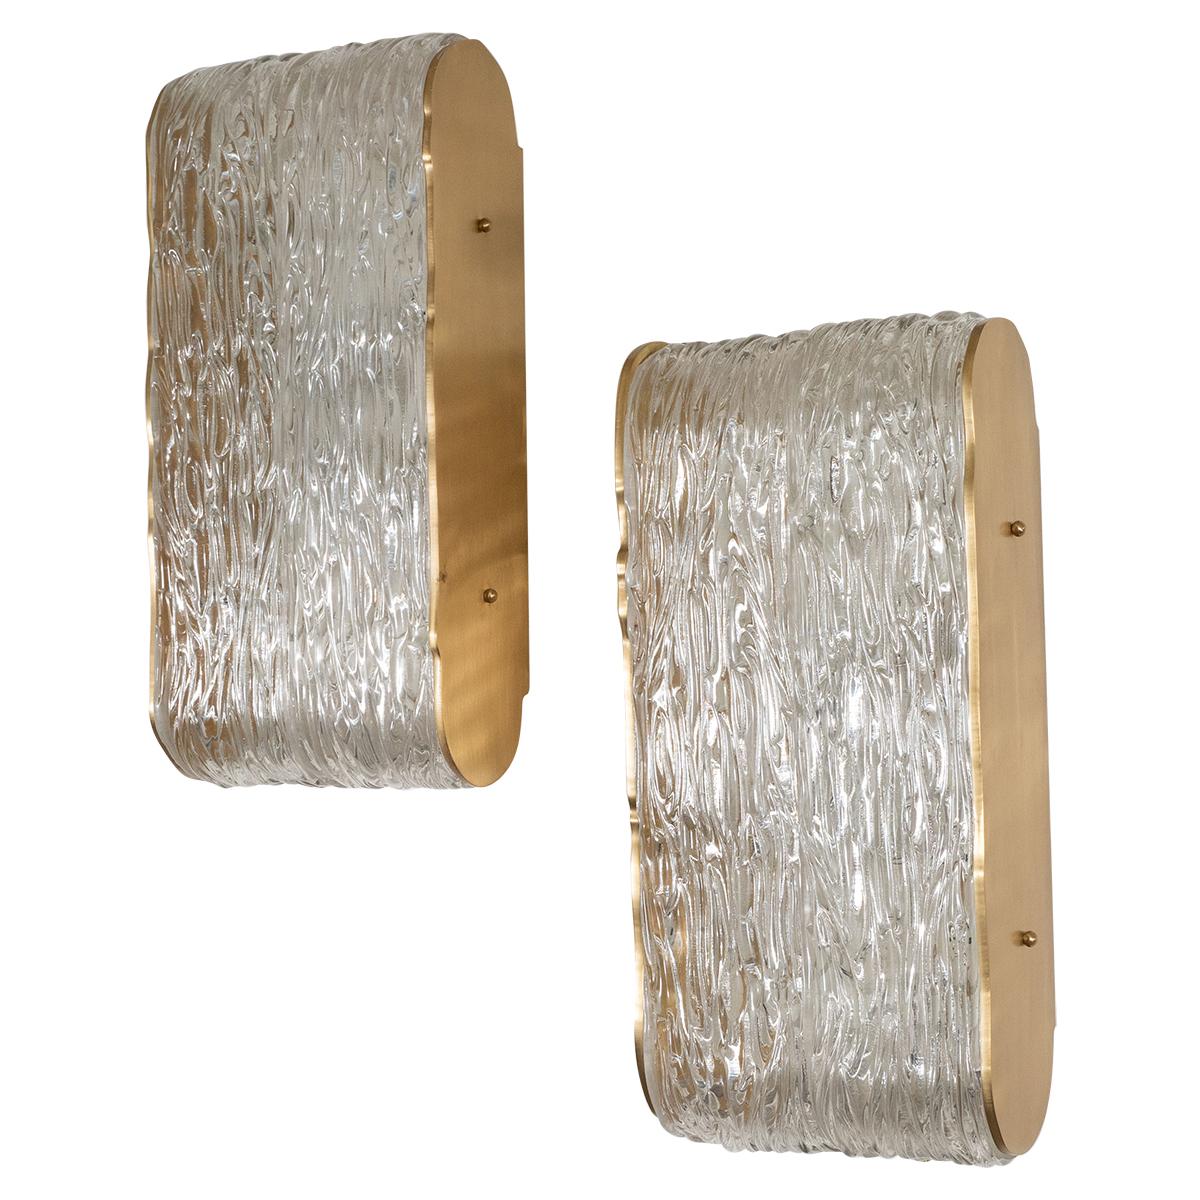 Pair of wavy textured glass sconces with ovoid brass frames in the style of Kalmar.